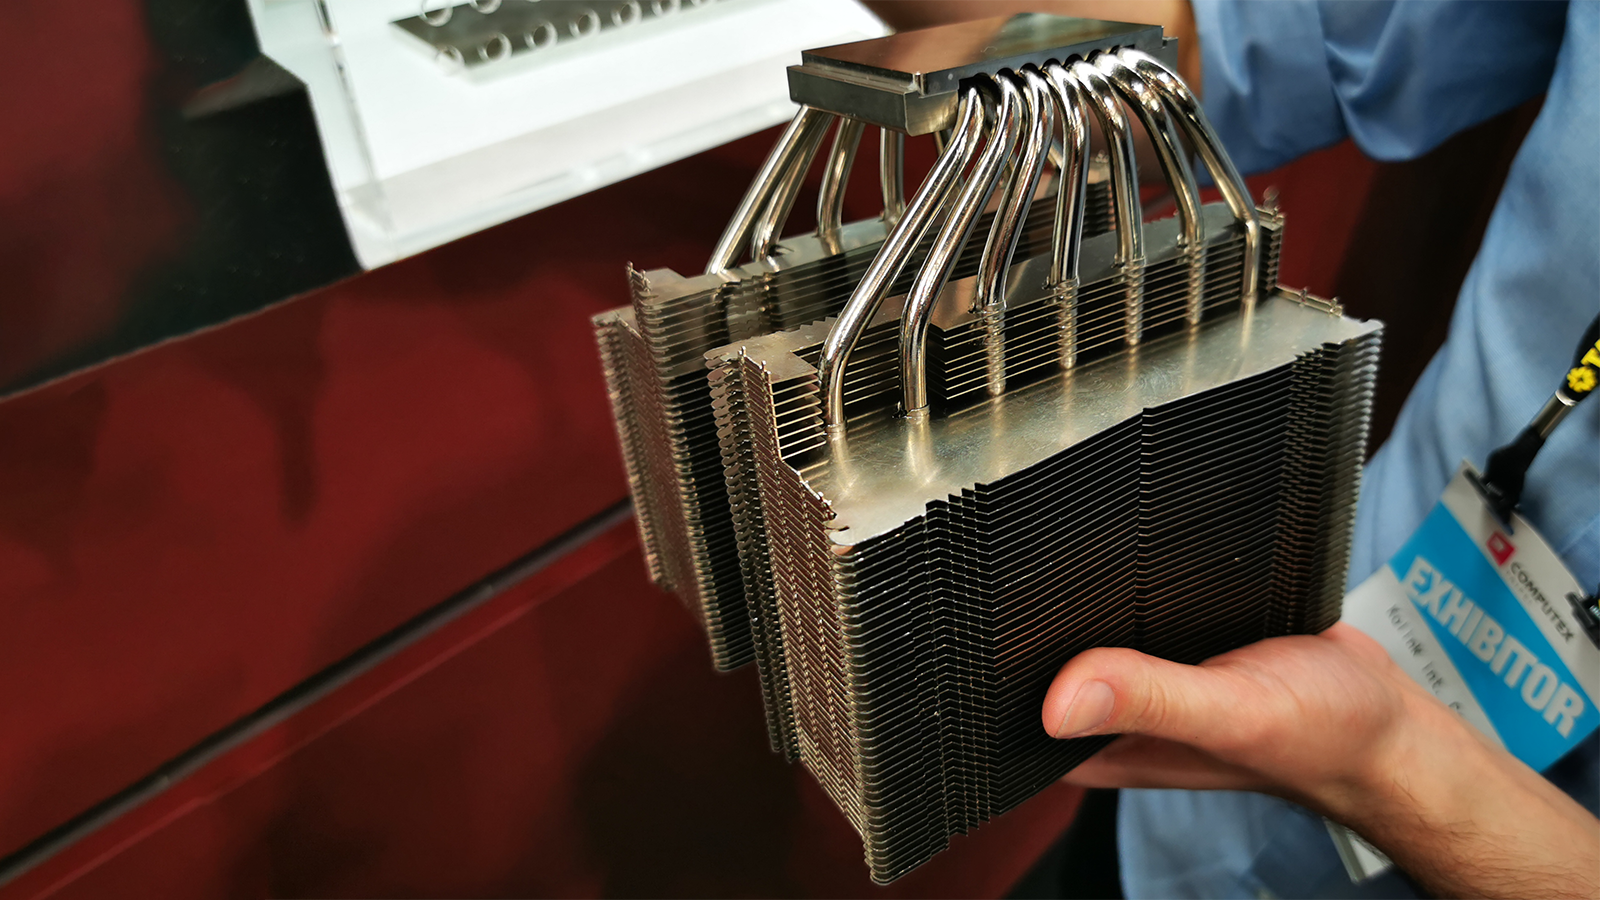 noctua-says-its-fanless-cpu-cooler-is-coming-‘very-soon,’-shares-details